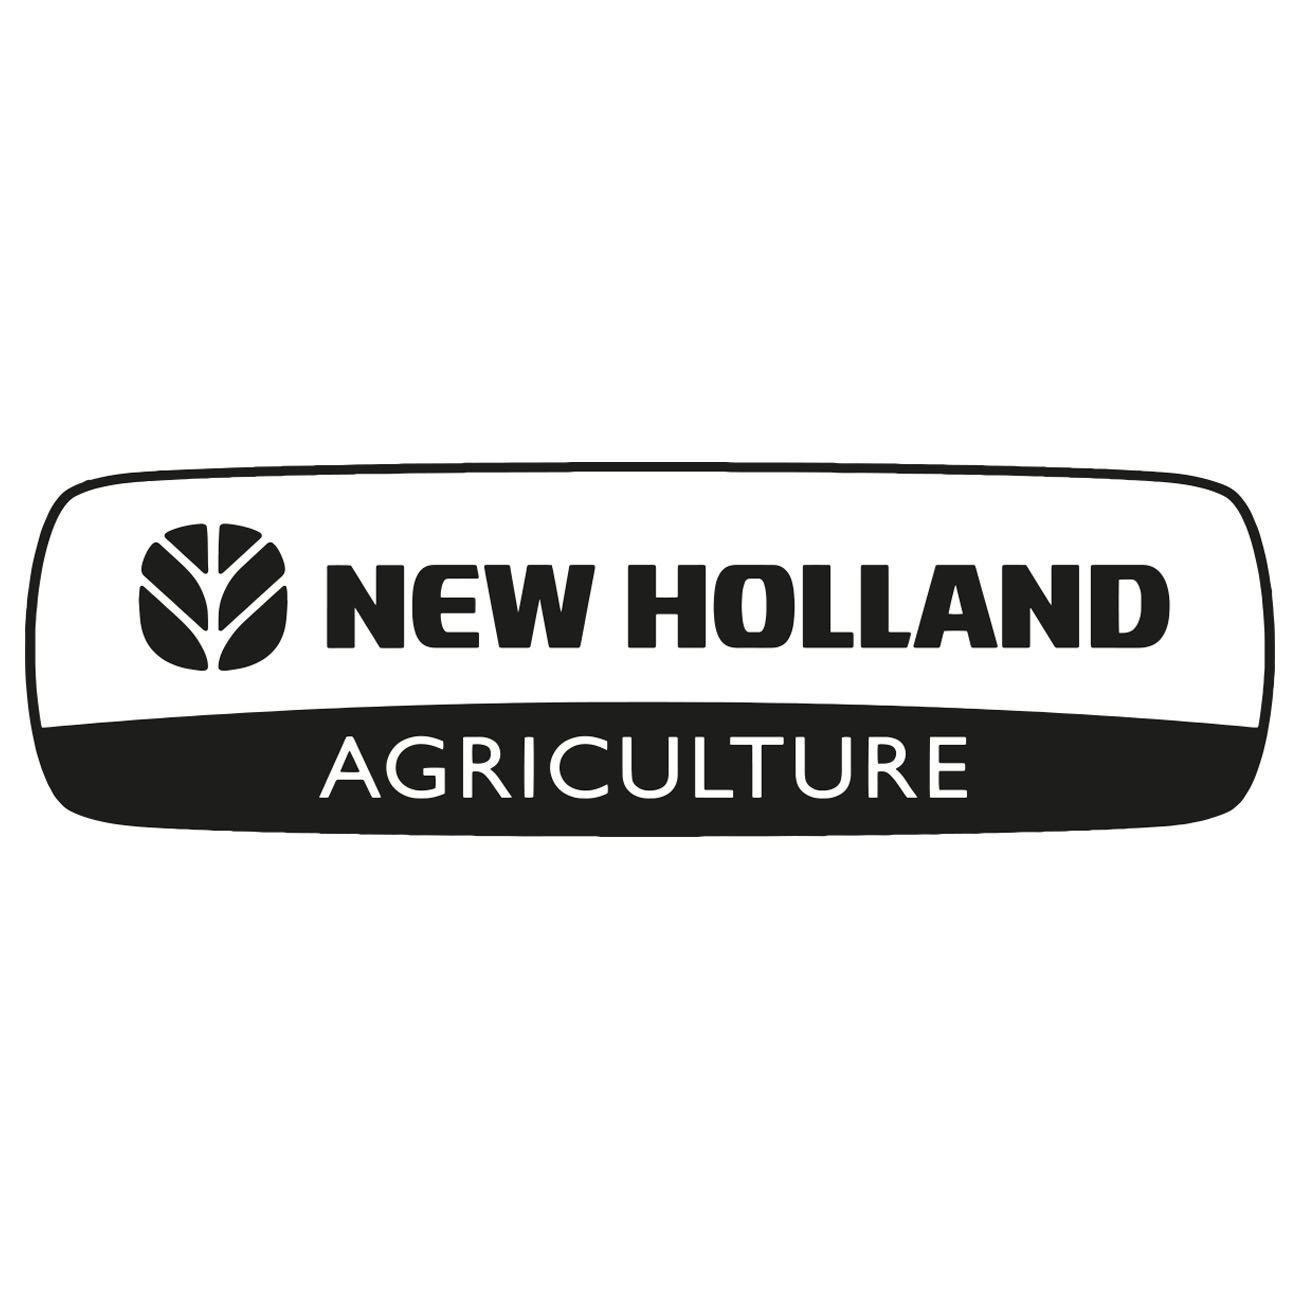 Discover more than 139 new holland tractor logo super hot - camera.edu.vn